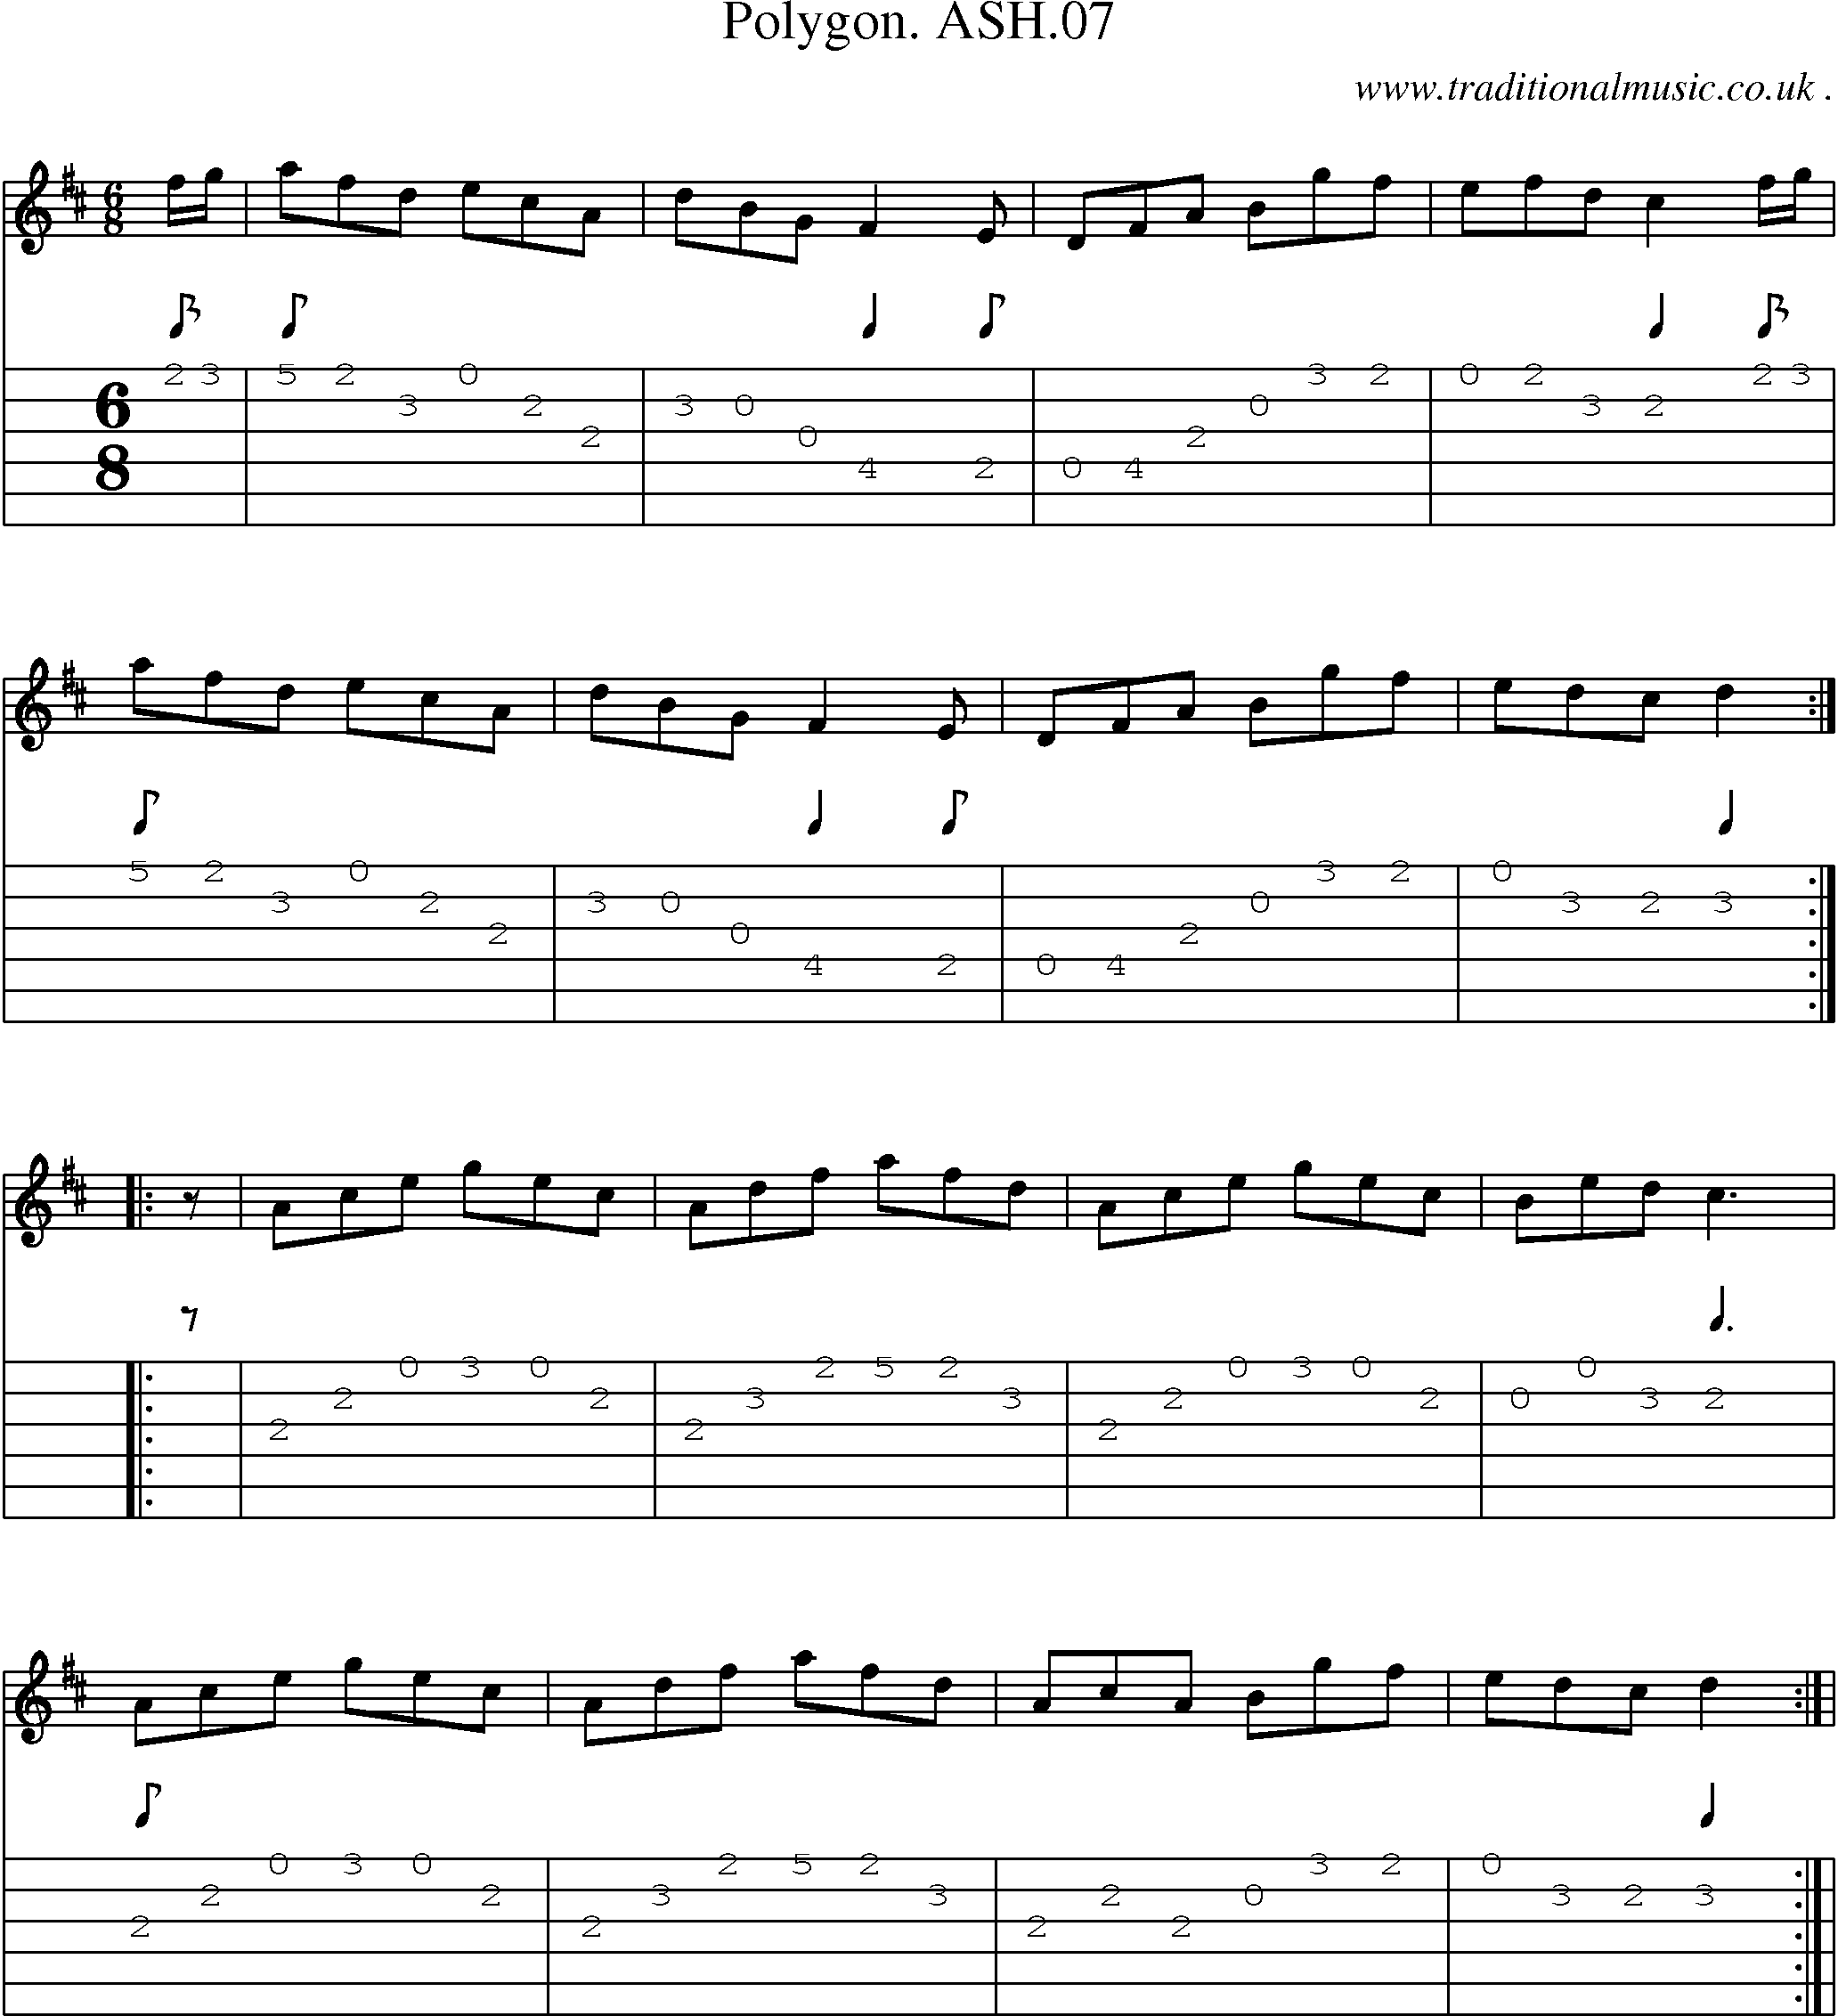 Sheet-Music and Guitar Tabs for Polygon Ash07